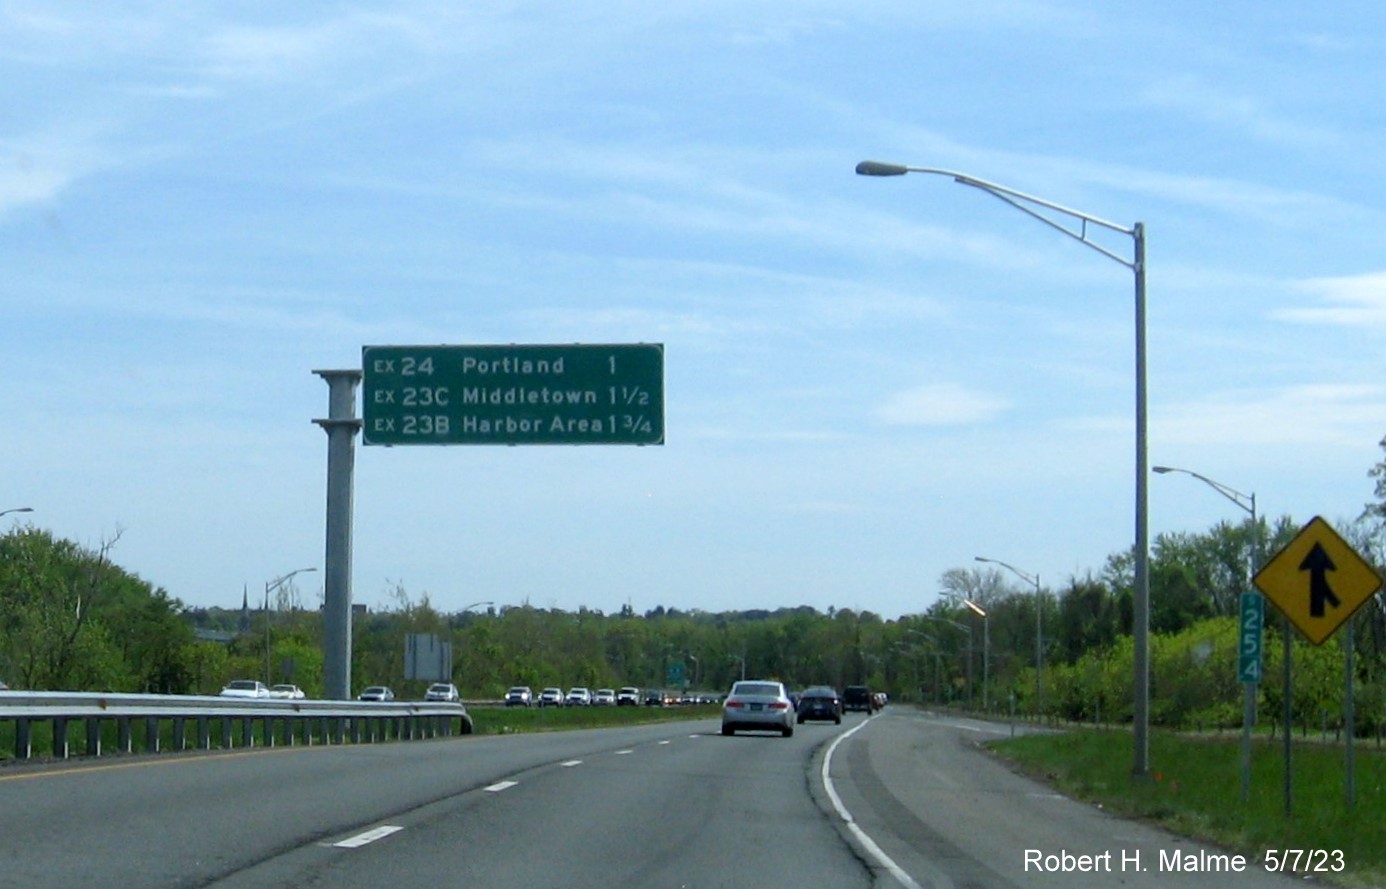 Image of overhead guide sign listing new milepost based exit numbers for Middletown exits on CT 9 South, May 2023